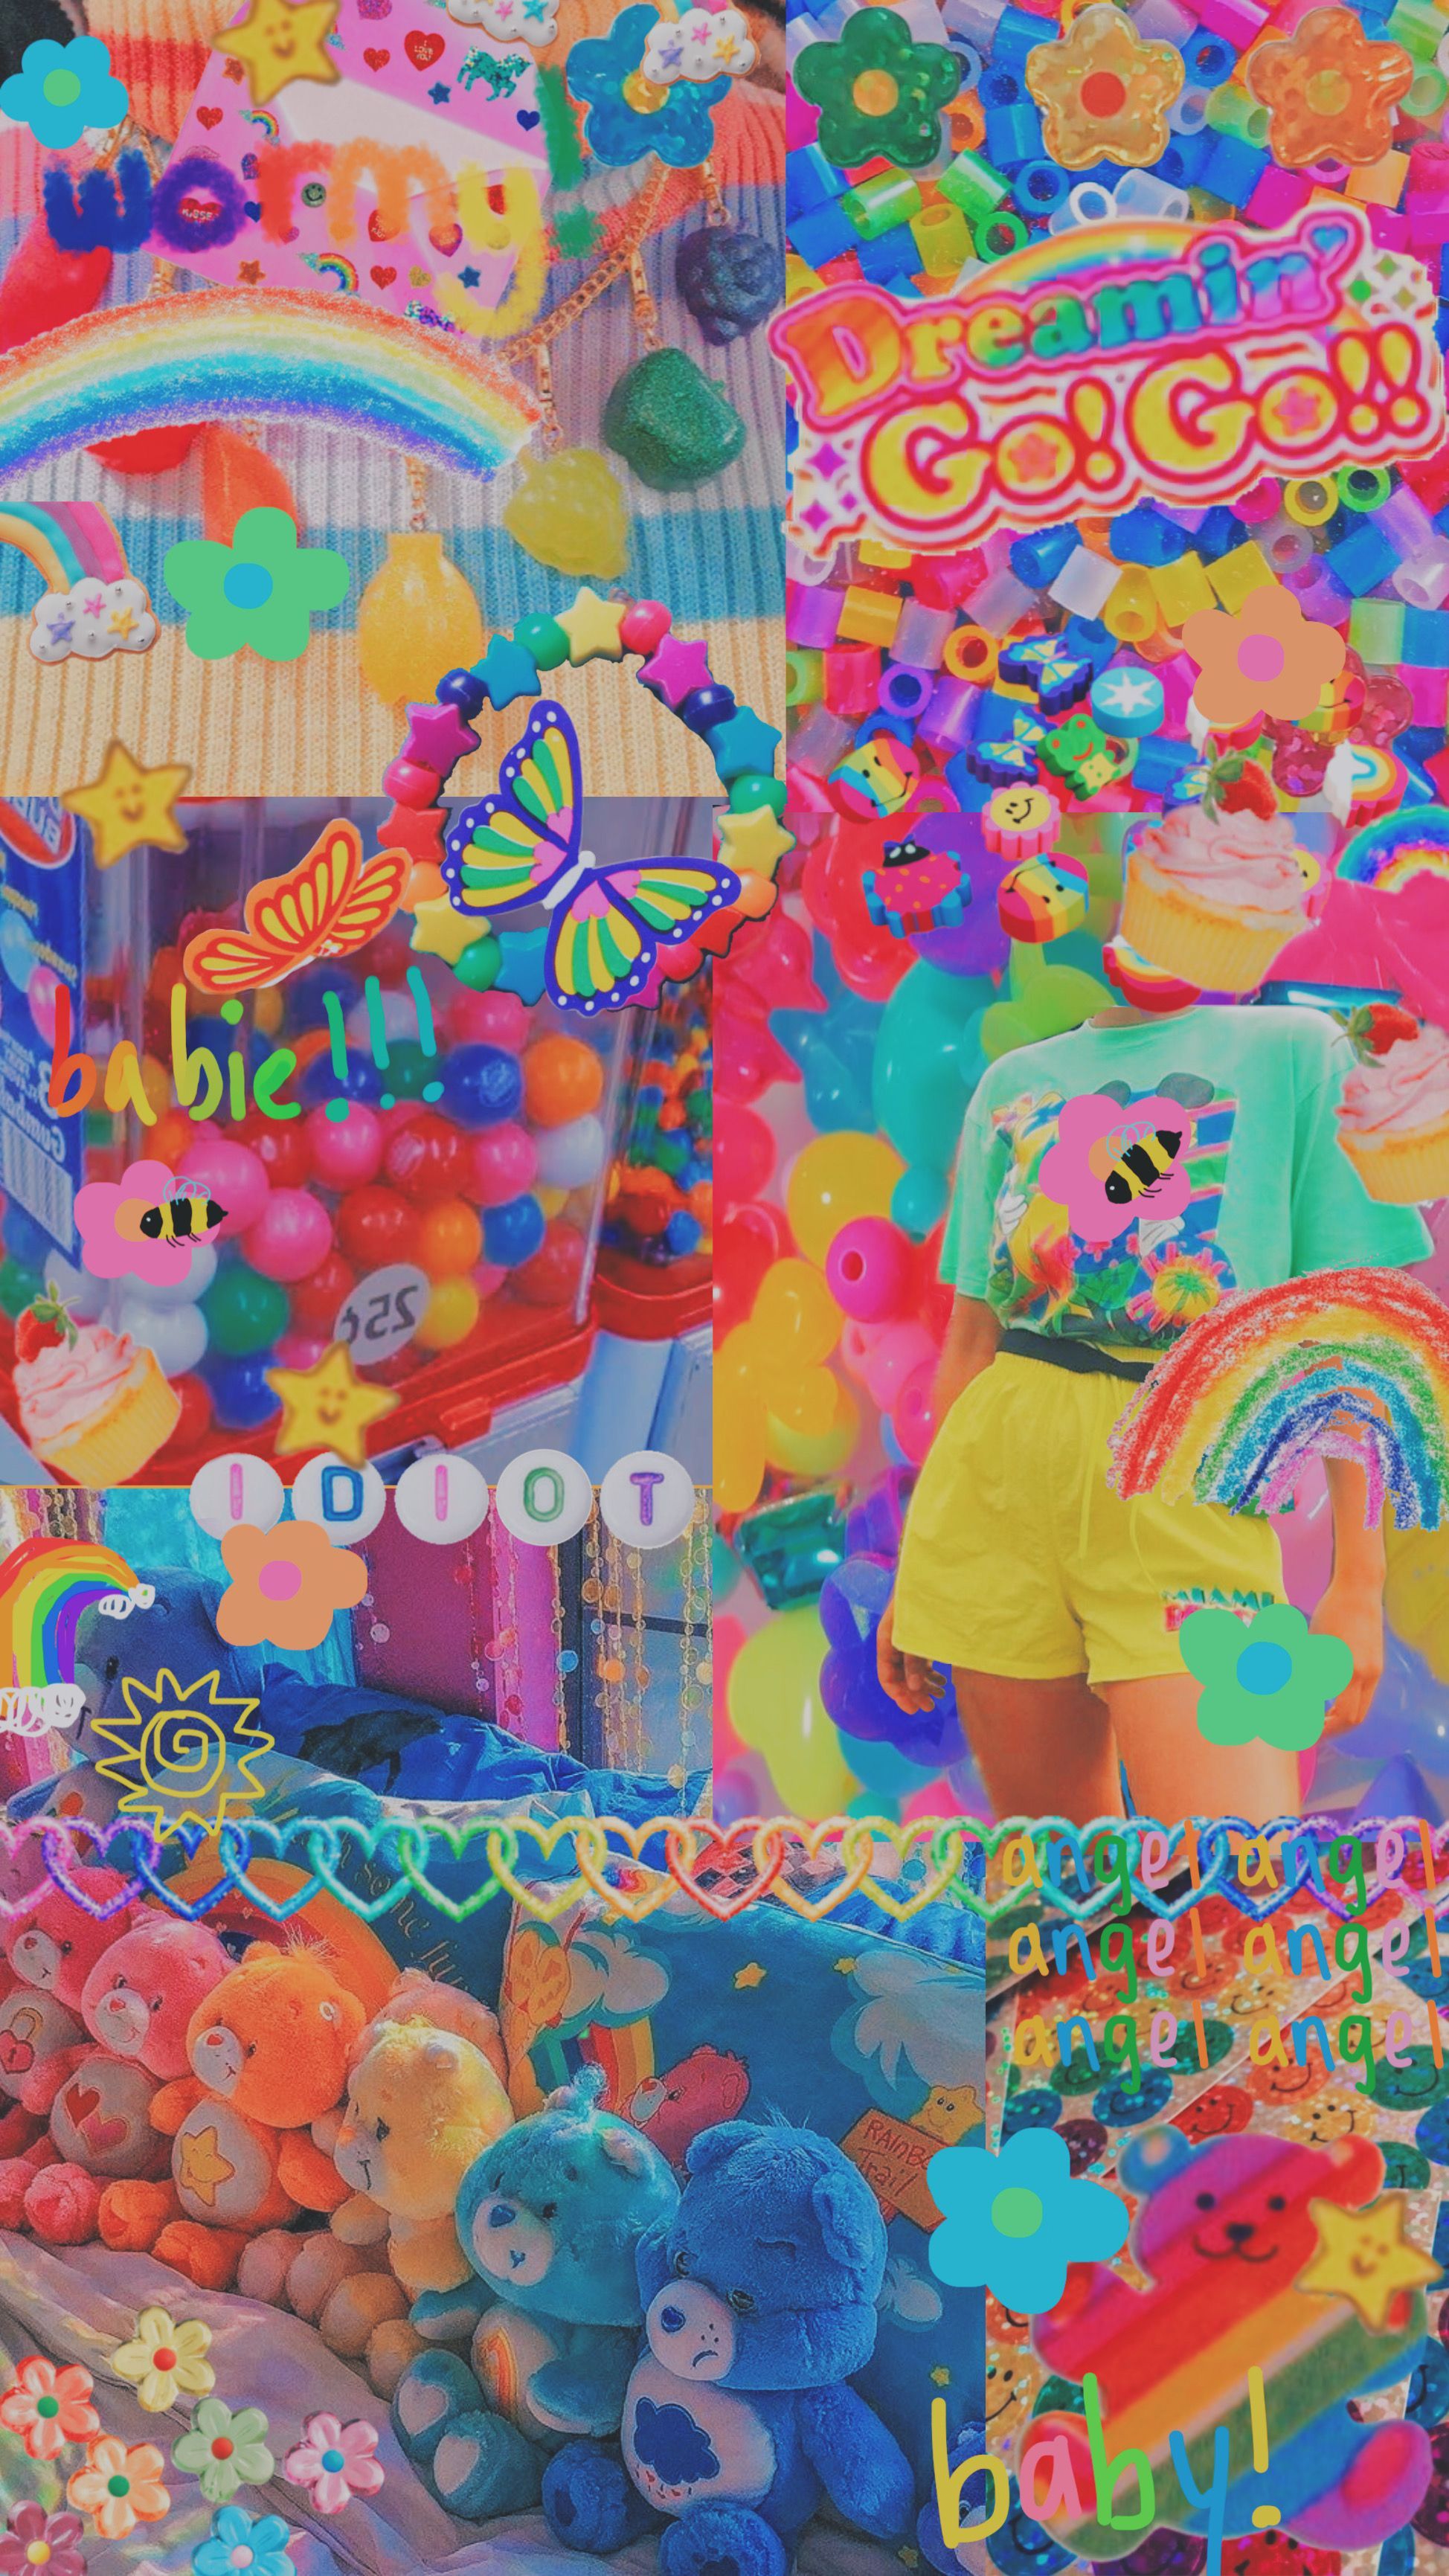 A colorful wallpaper of toys and candies - Kidcore